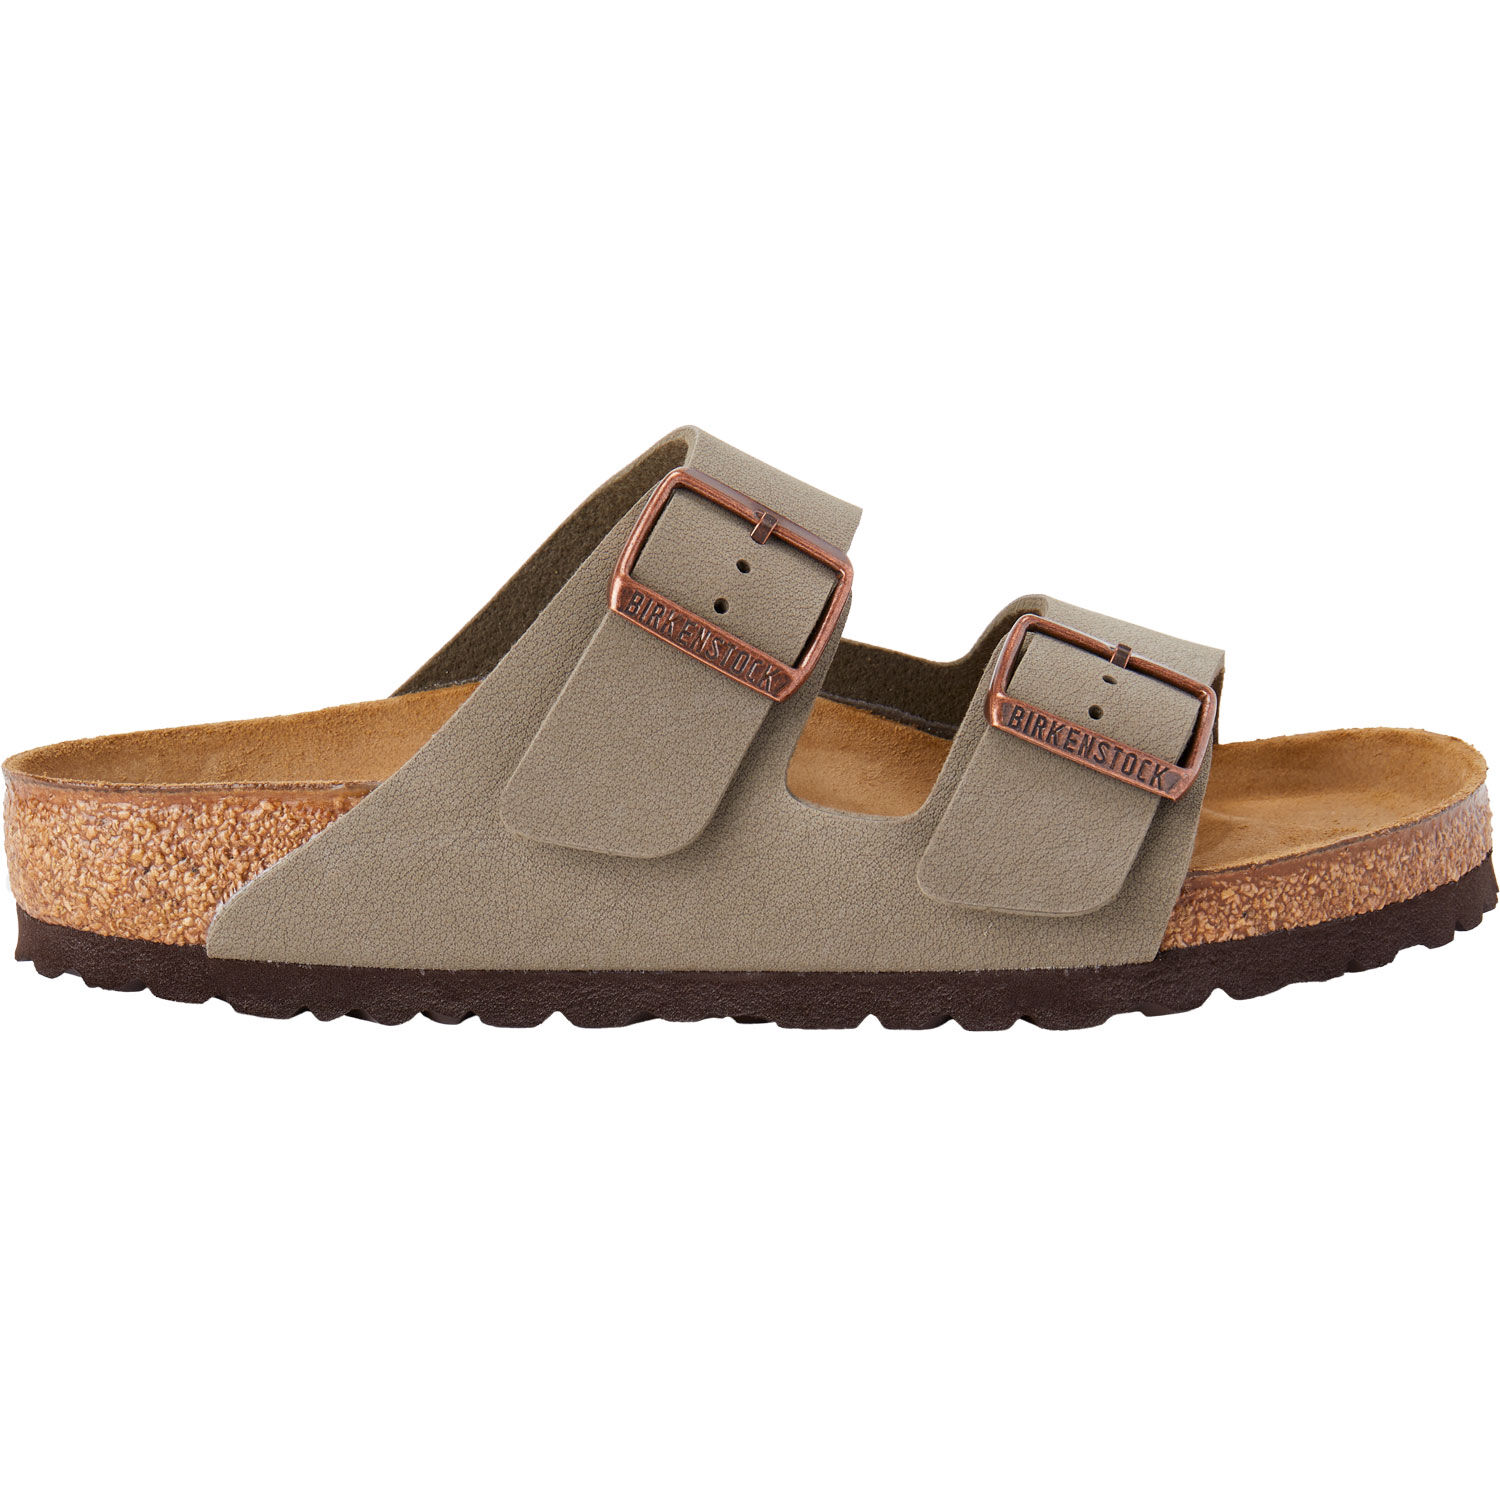 Why Birkenstock Arizona EVA sandals are great for the summer